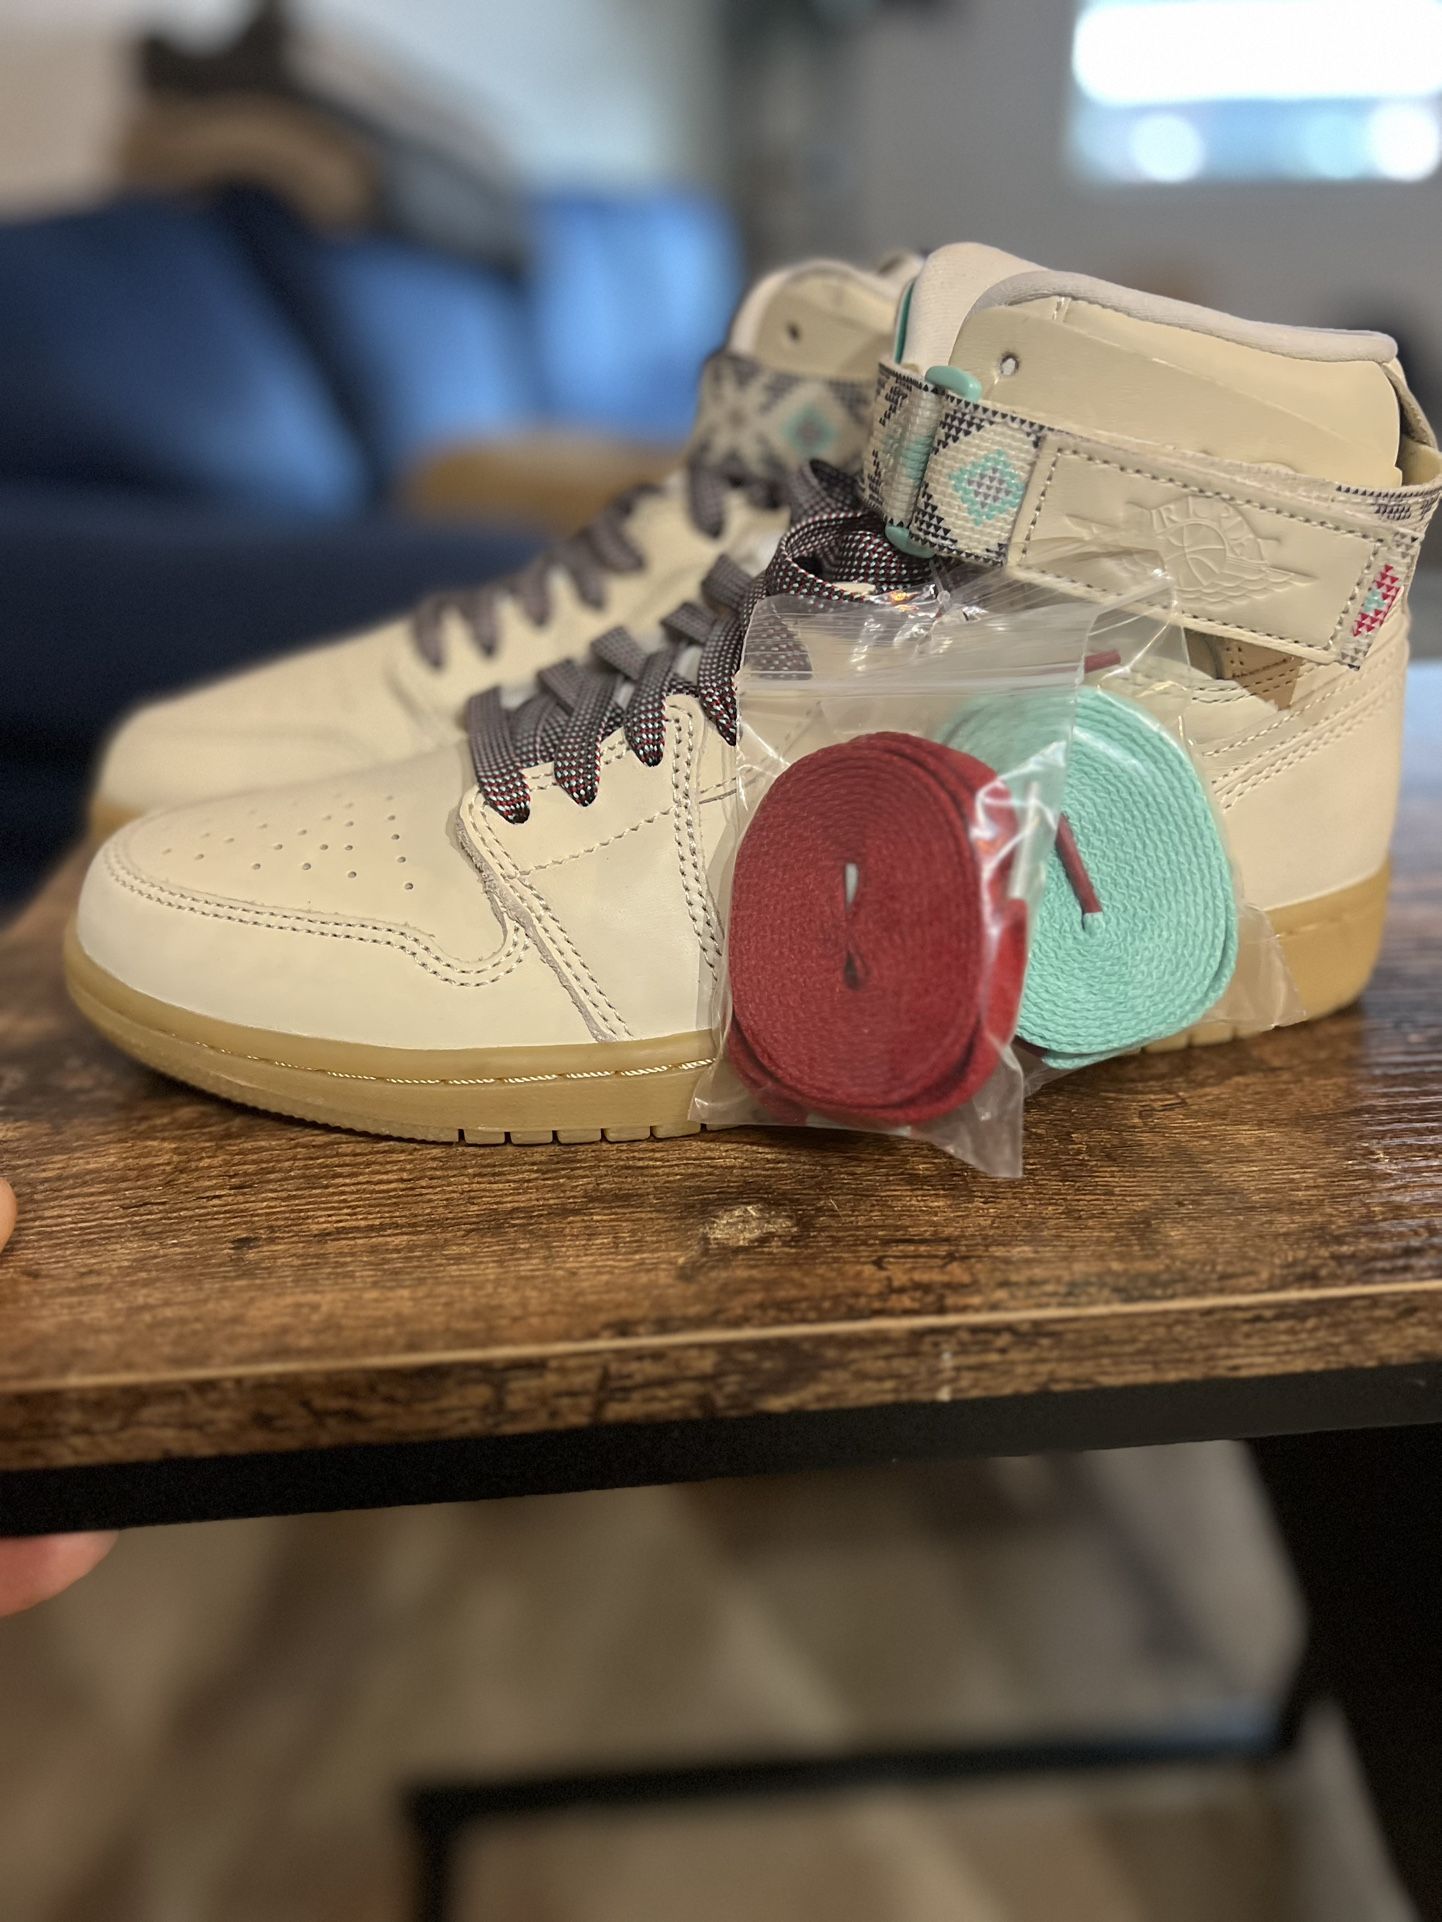 Air Jordan 1 High Strap Looks Better Without The Strap 